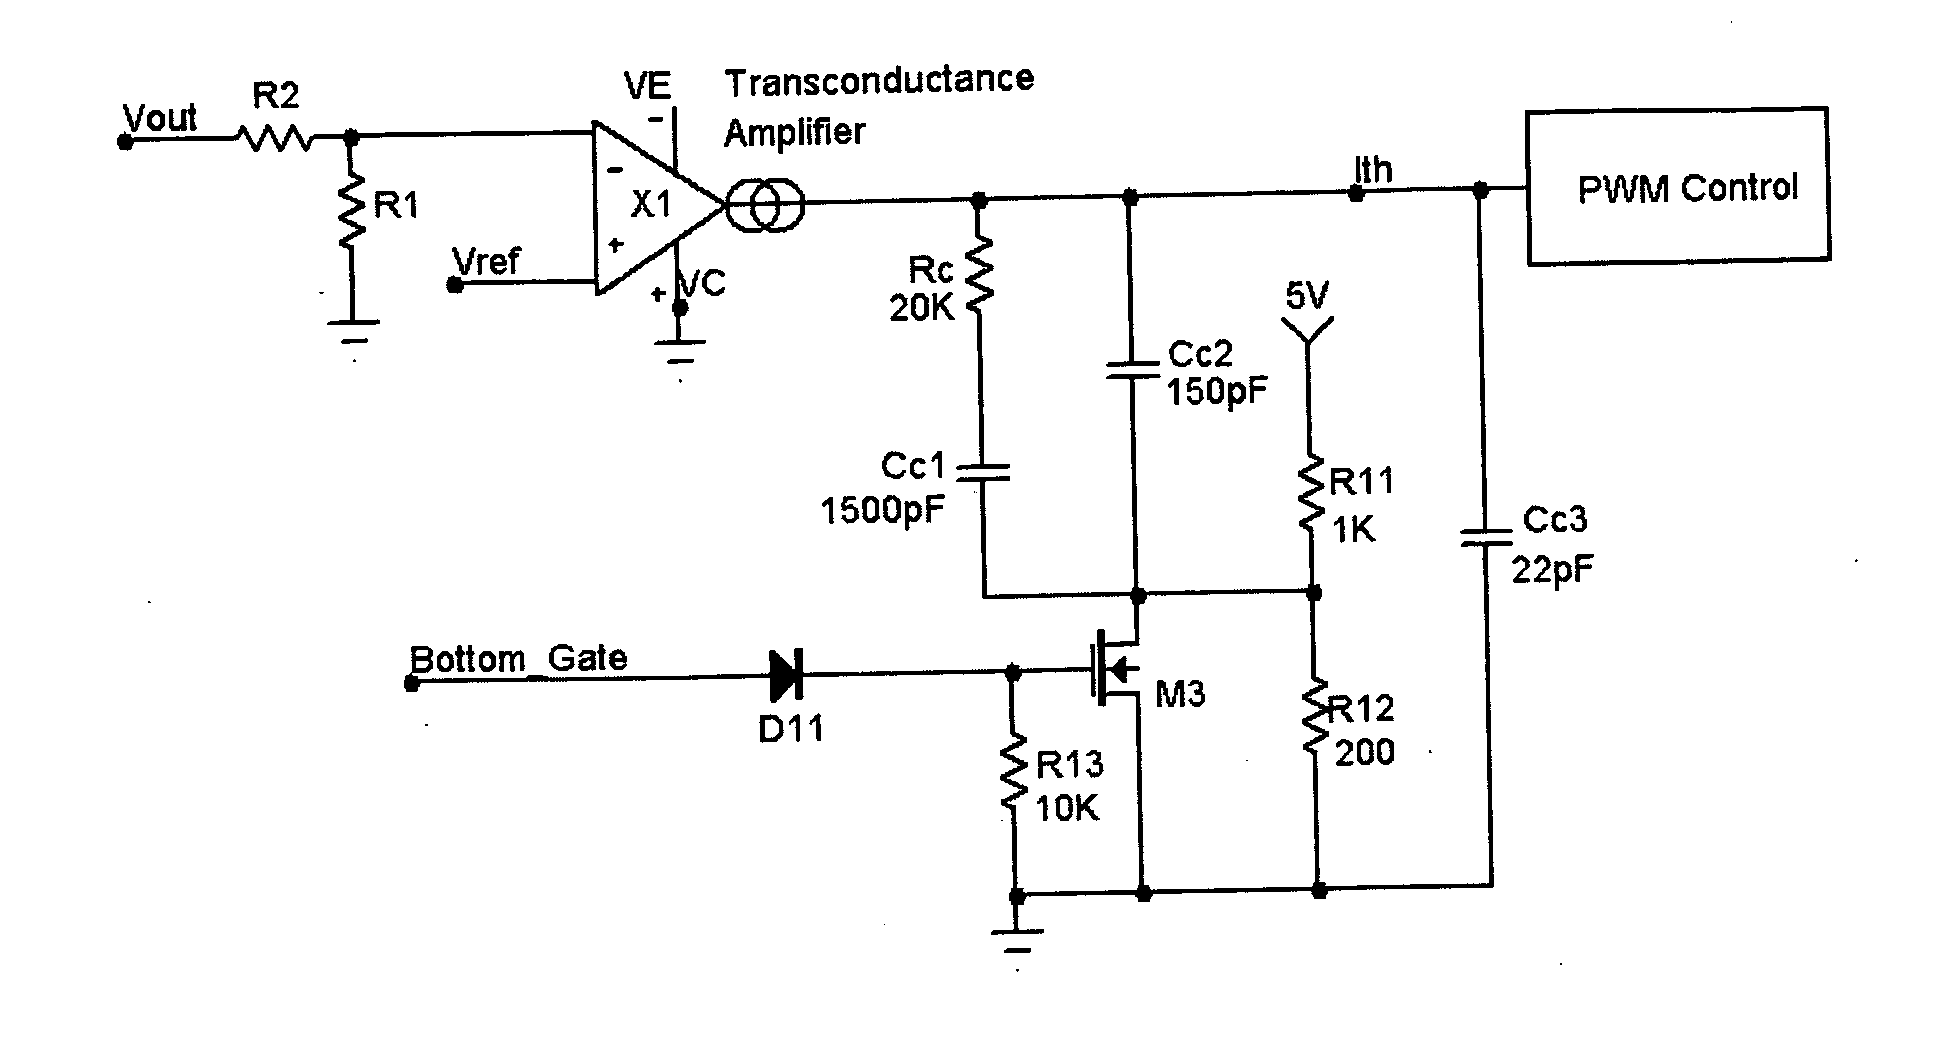 Output voltage ripple reduction technique for burst mode operation of power converter